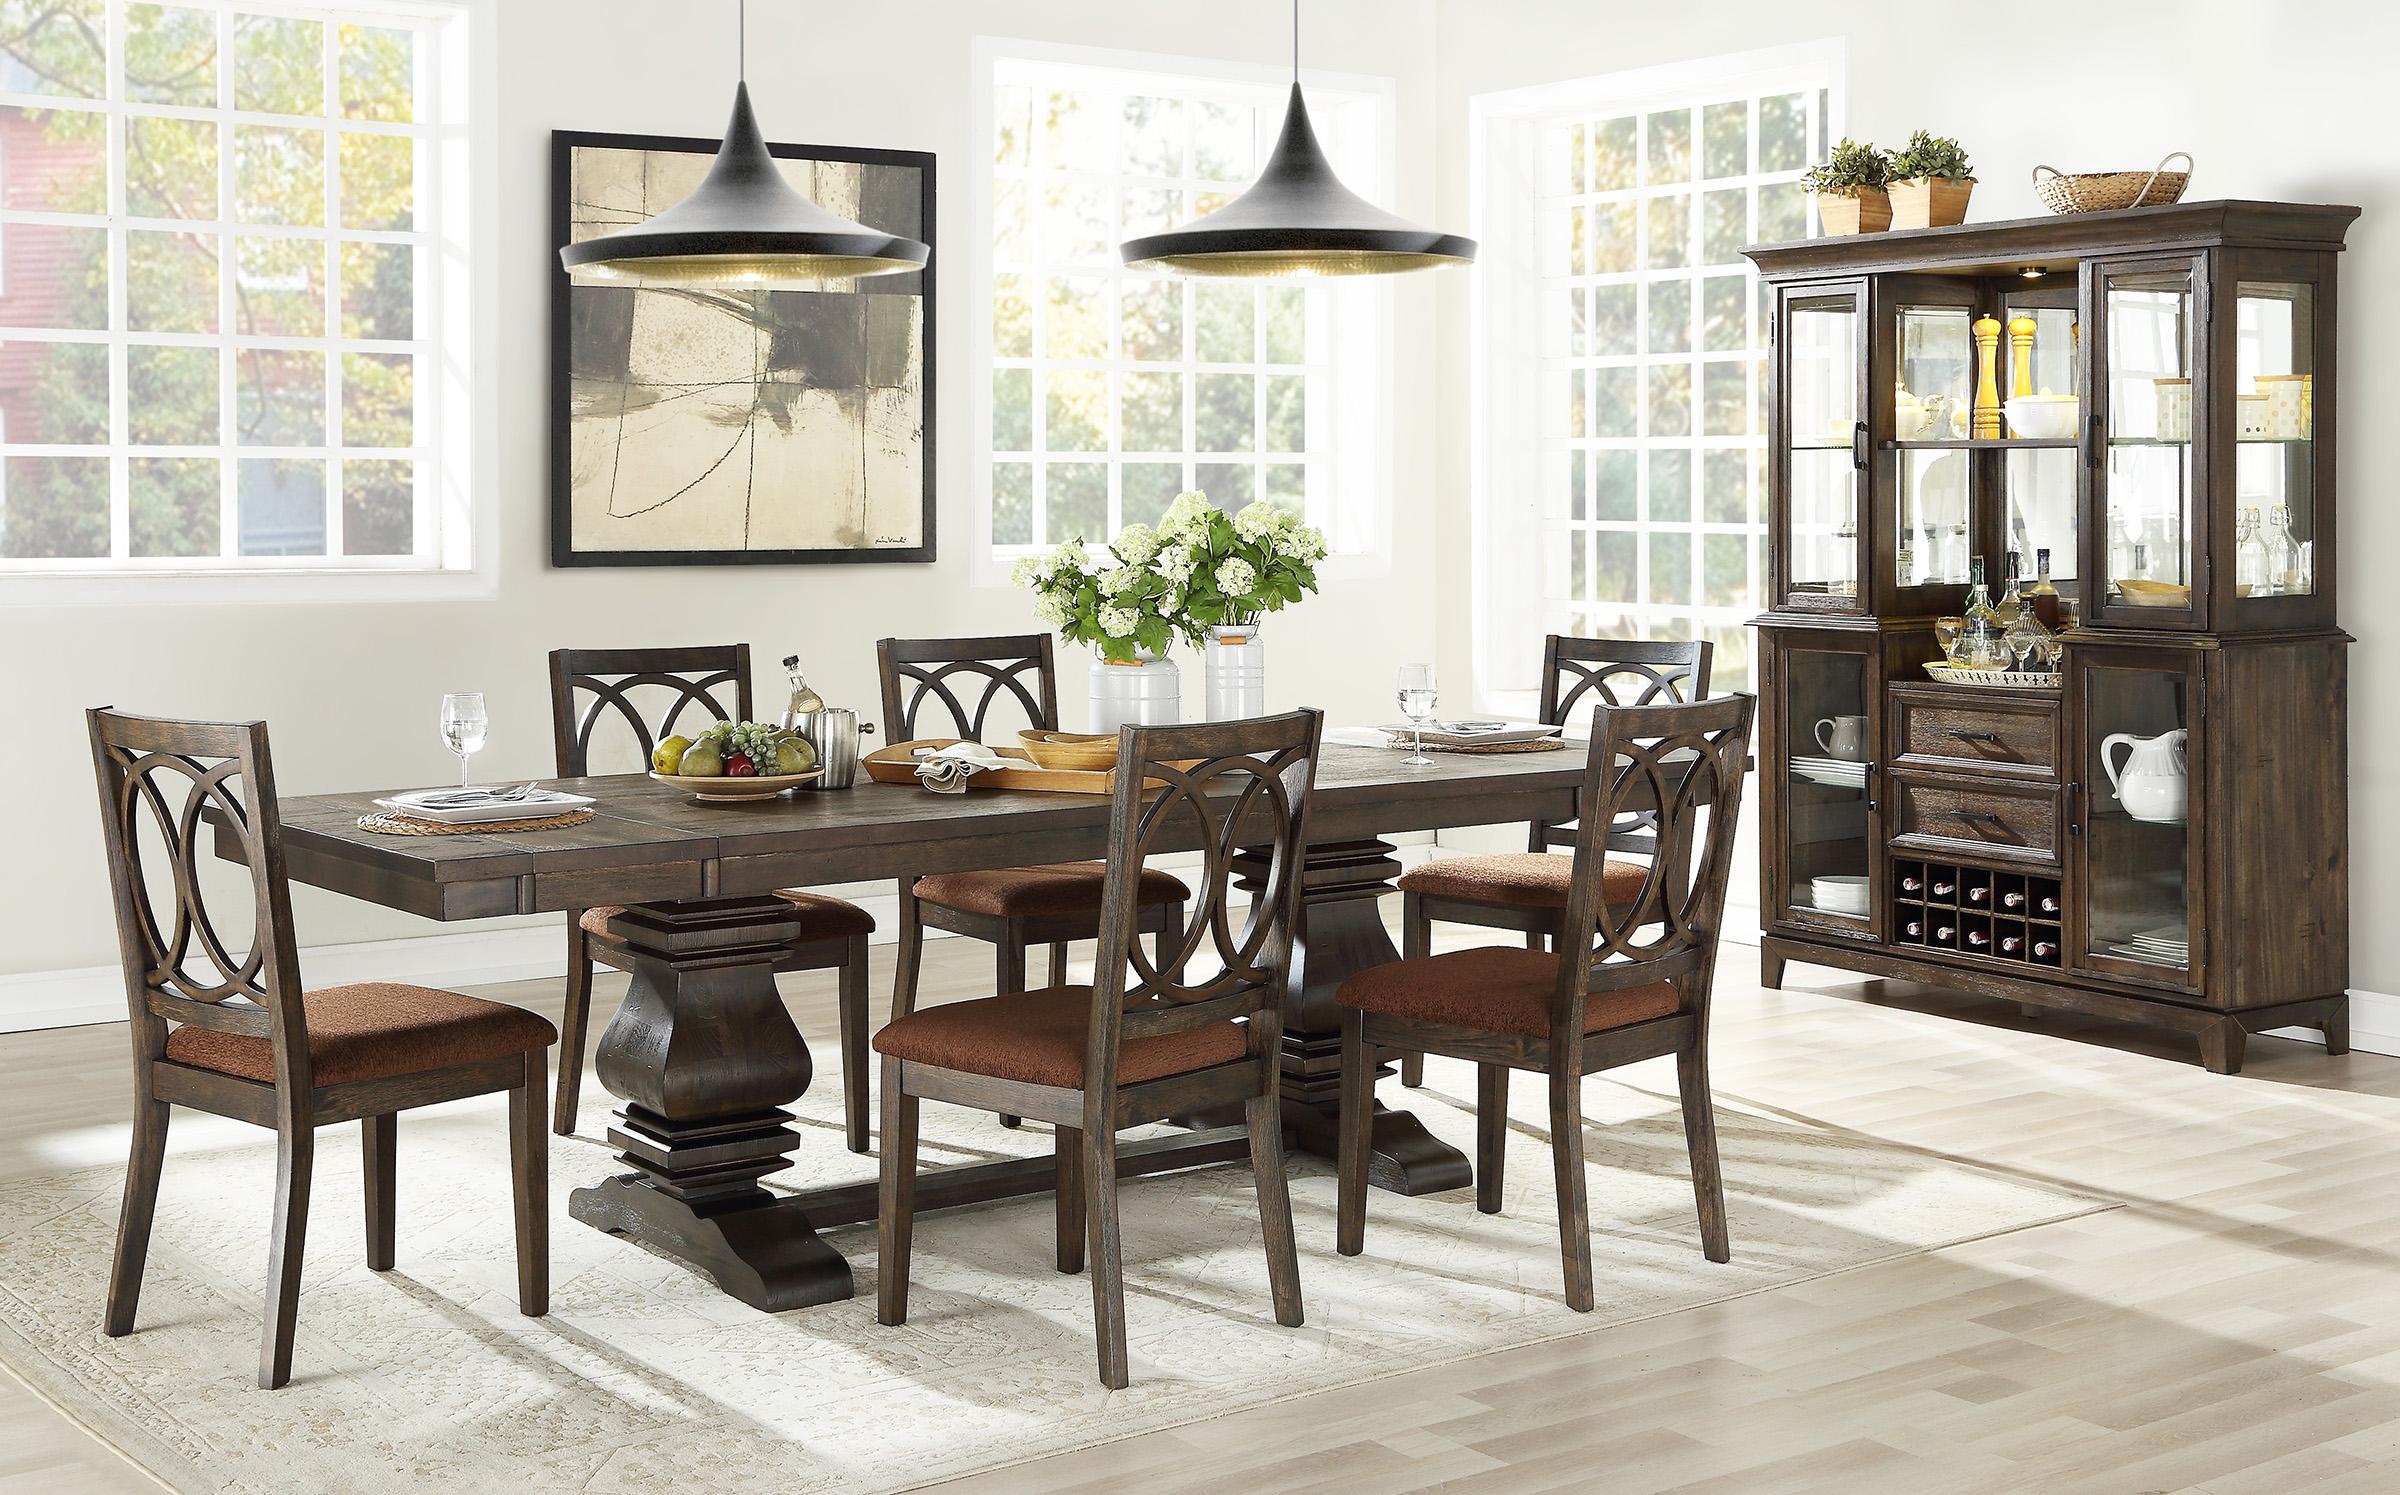 

    
Acacia Wood Espresso Dining Table Set 7Ps Jameson 62320 ACME Traditional Classic
